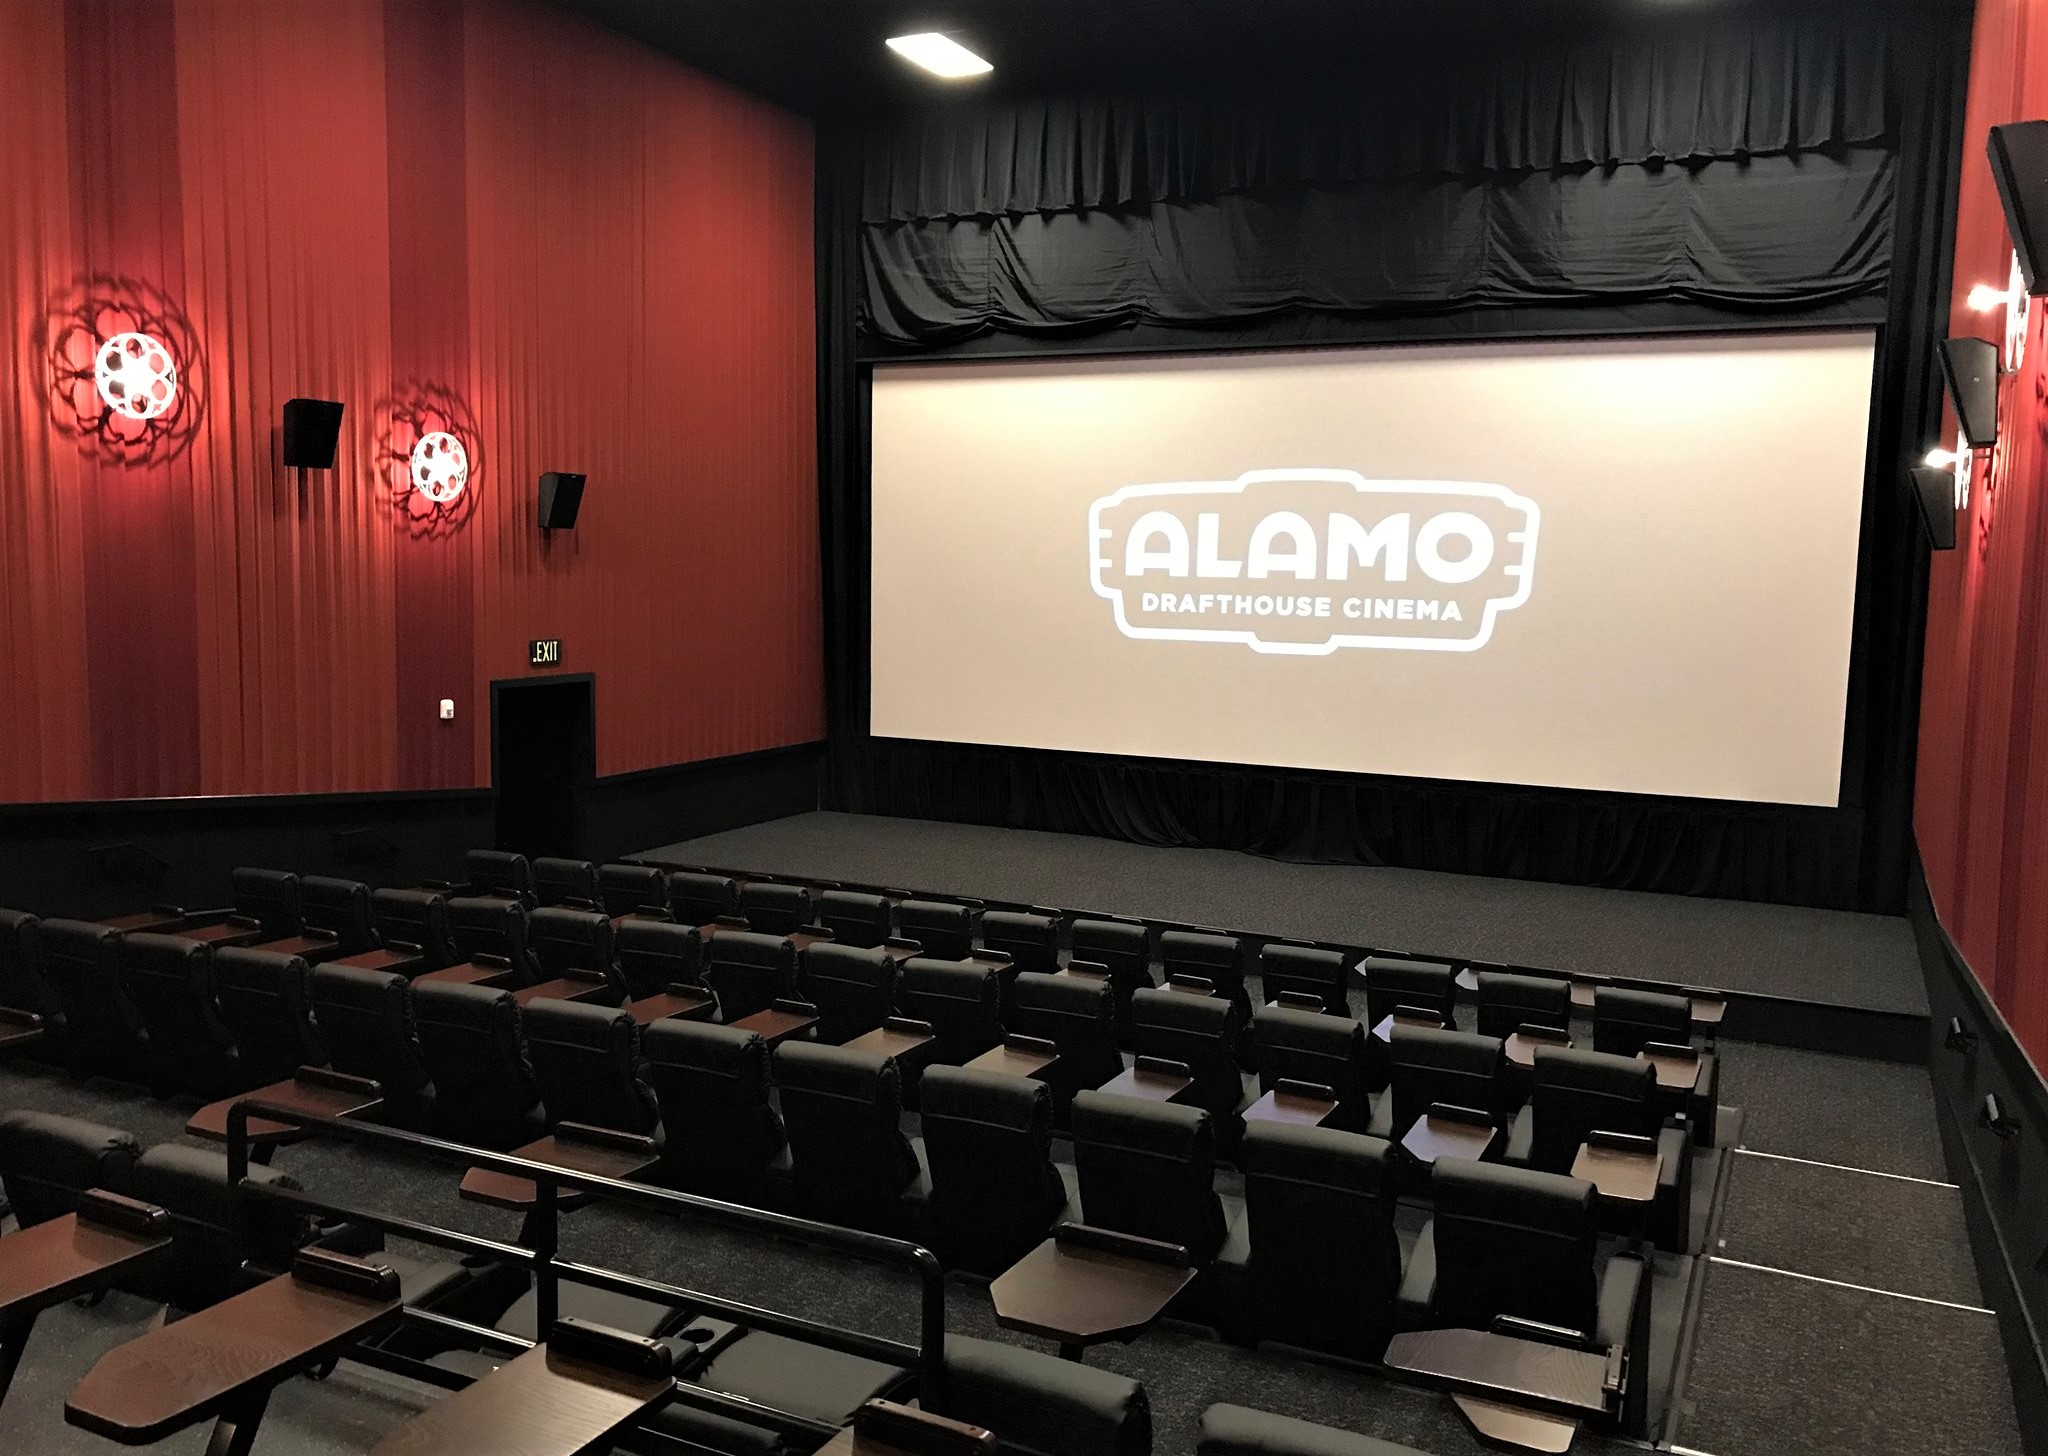 Alamo Drafthouse will open at Mercato in early spring.